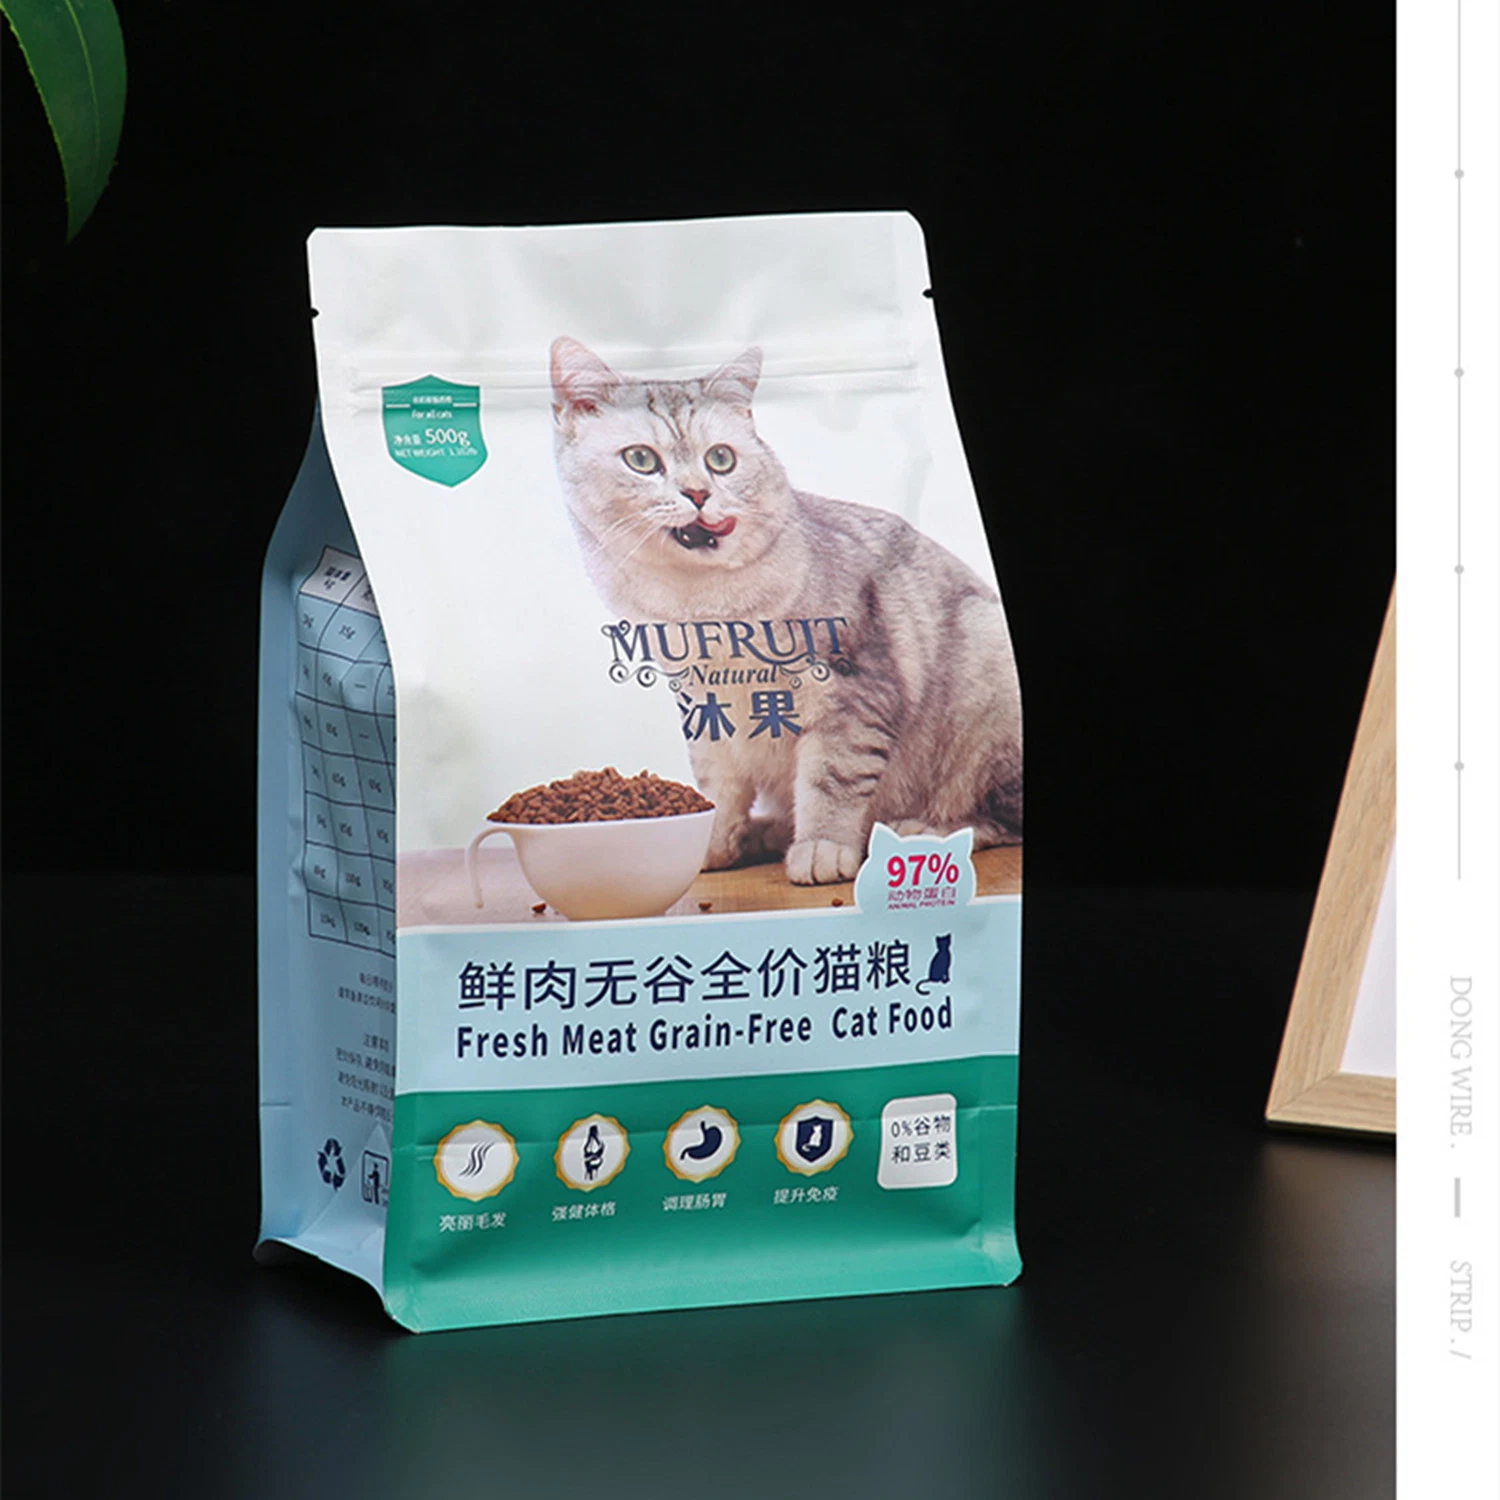 Eco-Friendly Sustainable Coffee Tea Pet Food Packaging Flat Bottom Bag 100% Compostable Biodegradable Kraft Paper Plastic Four Nutrition Powder Packing Bag